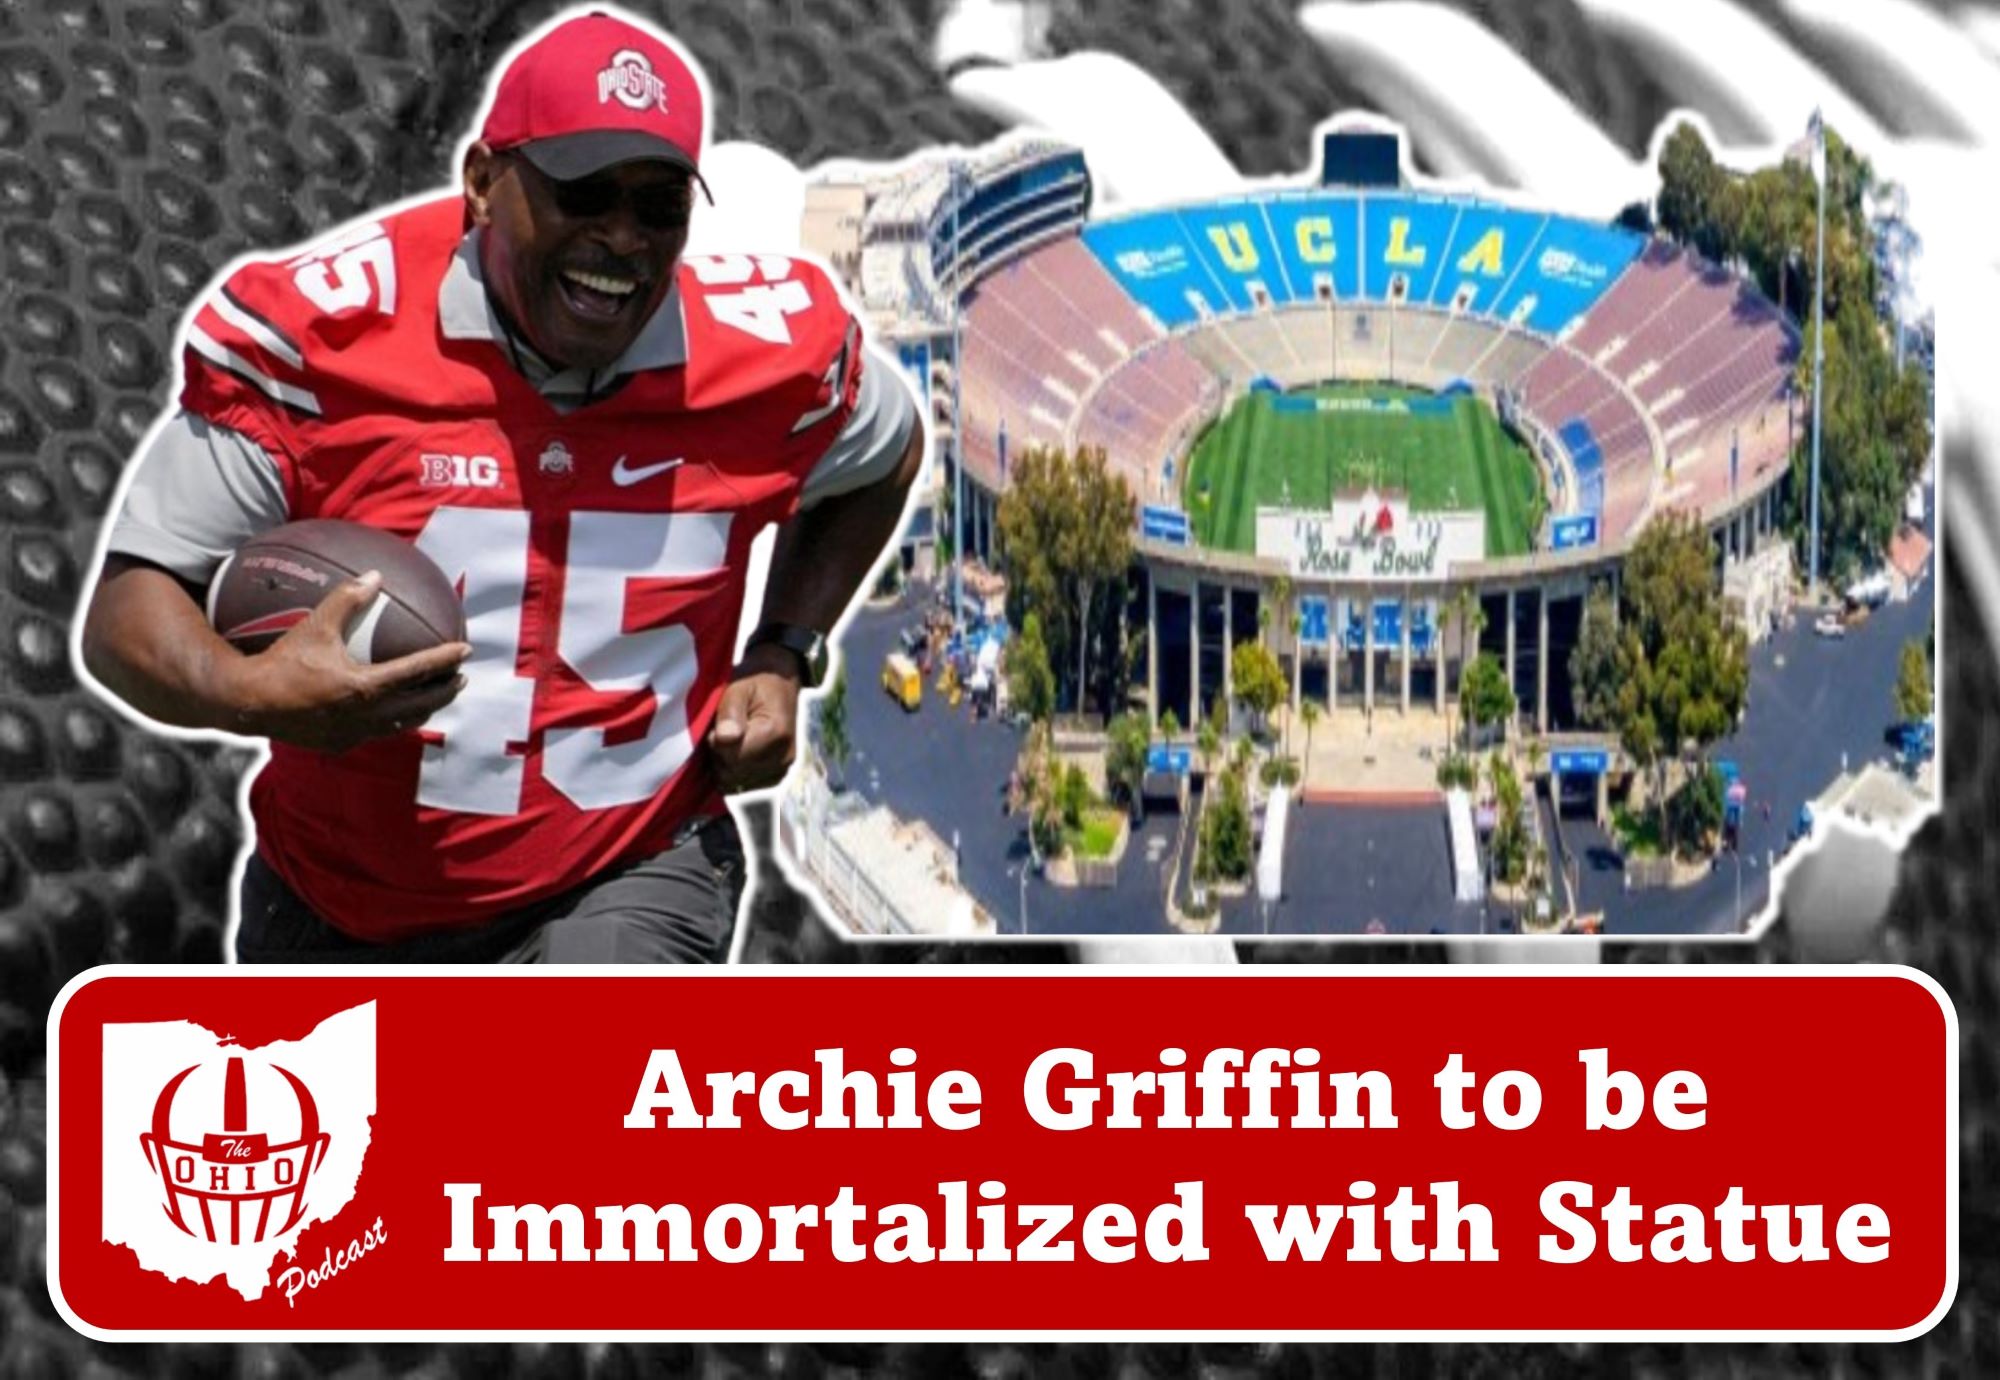 Archie Griffin to be Immortalized with Statue